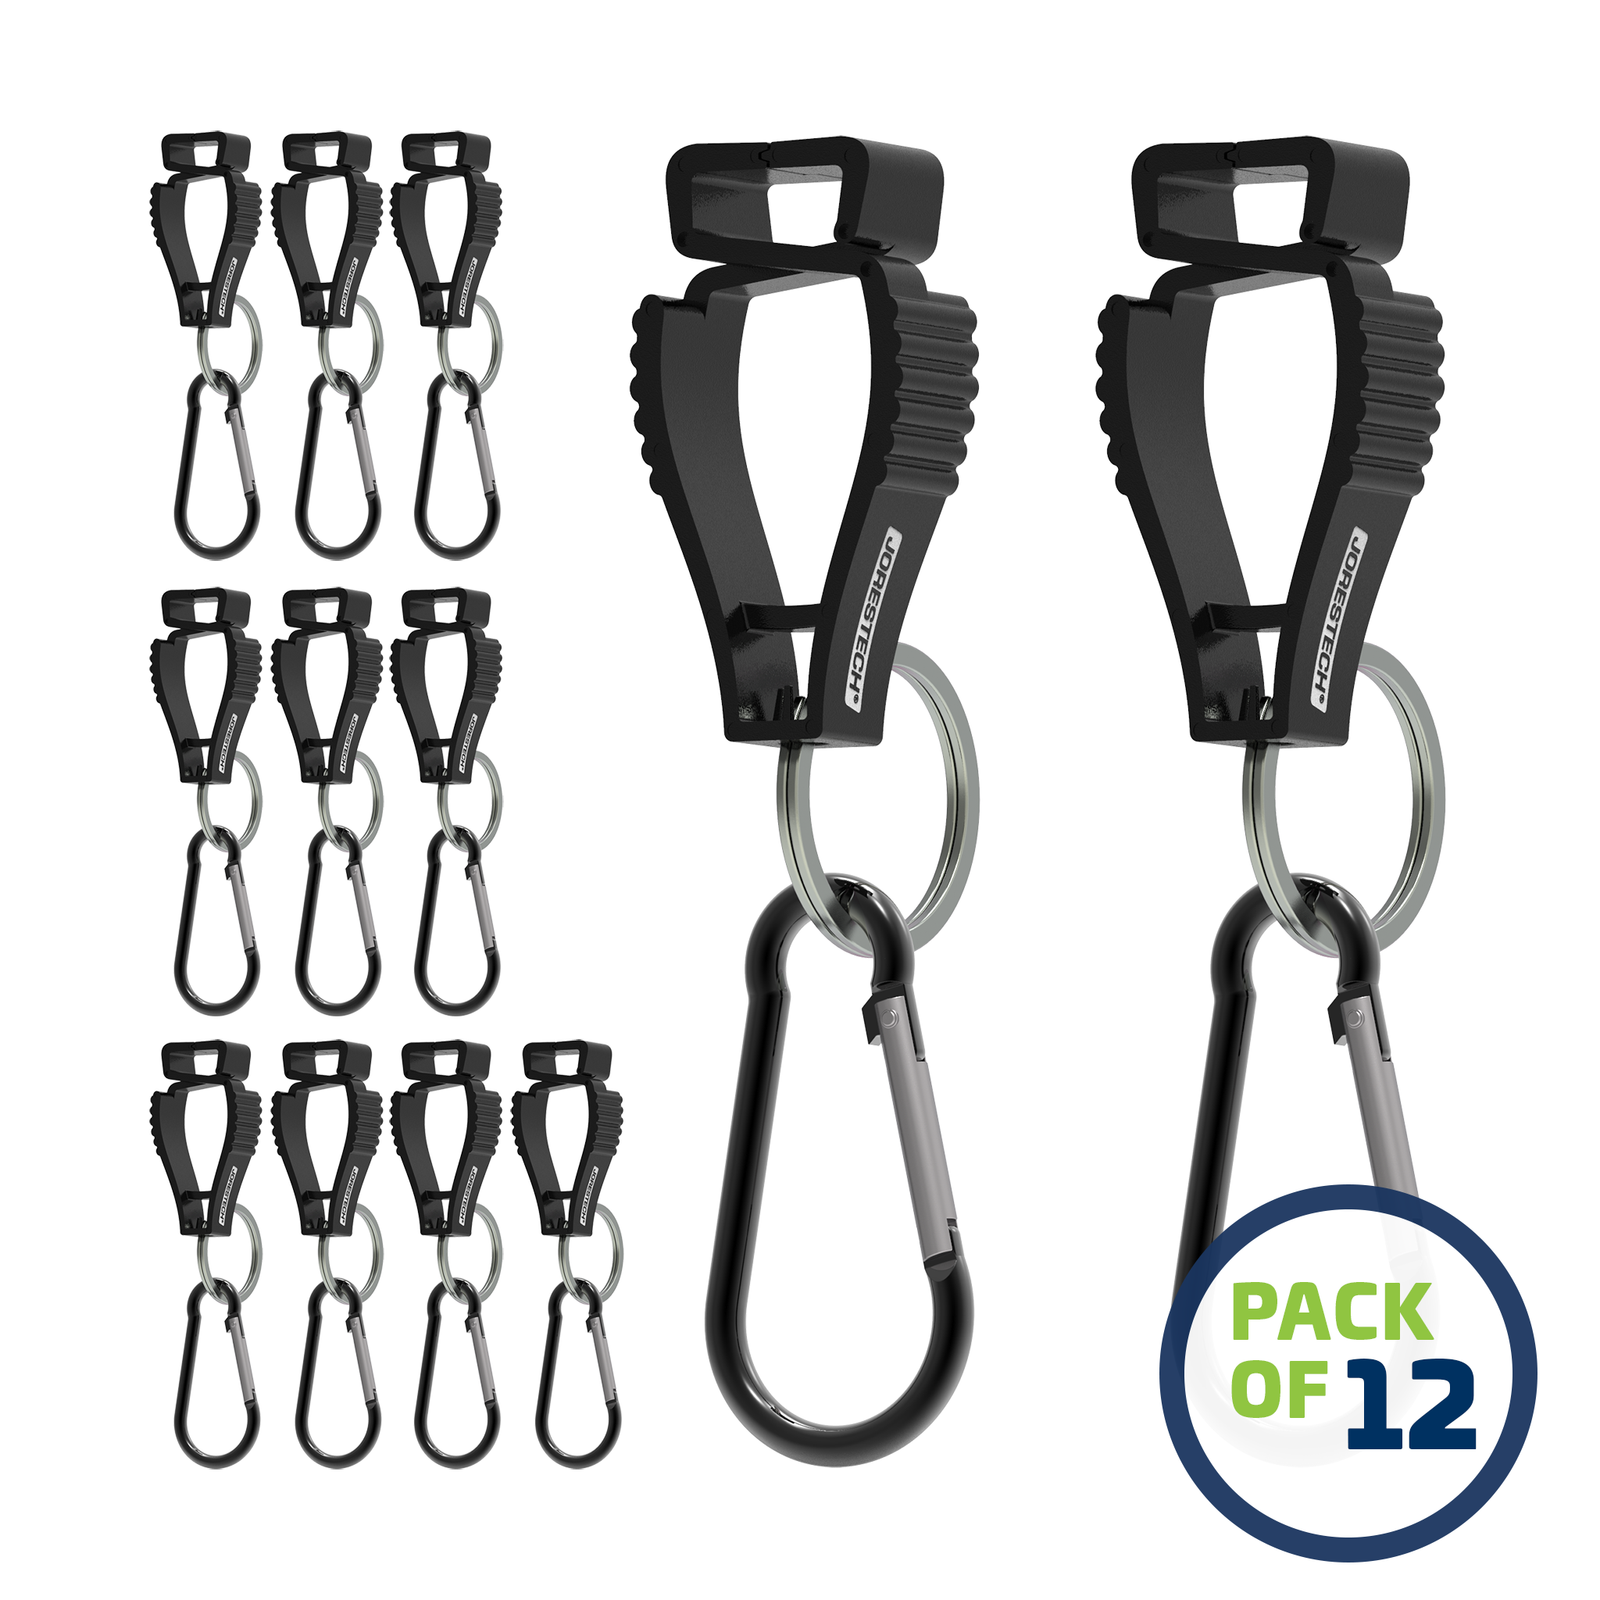 Pack of 12 Black JORESTECH glove clip safety holders with carabiner